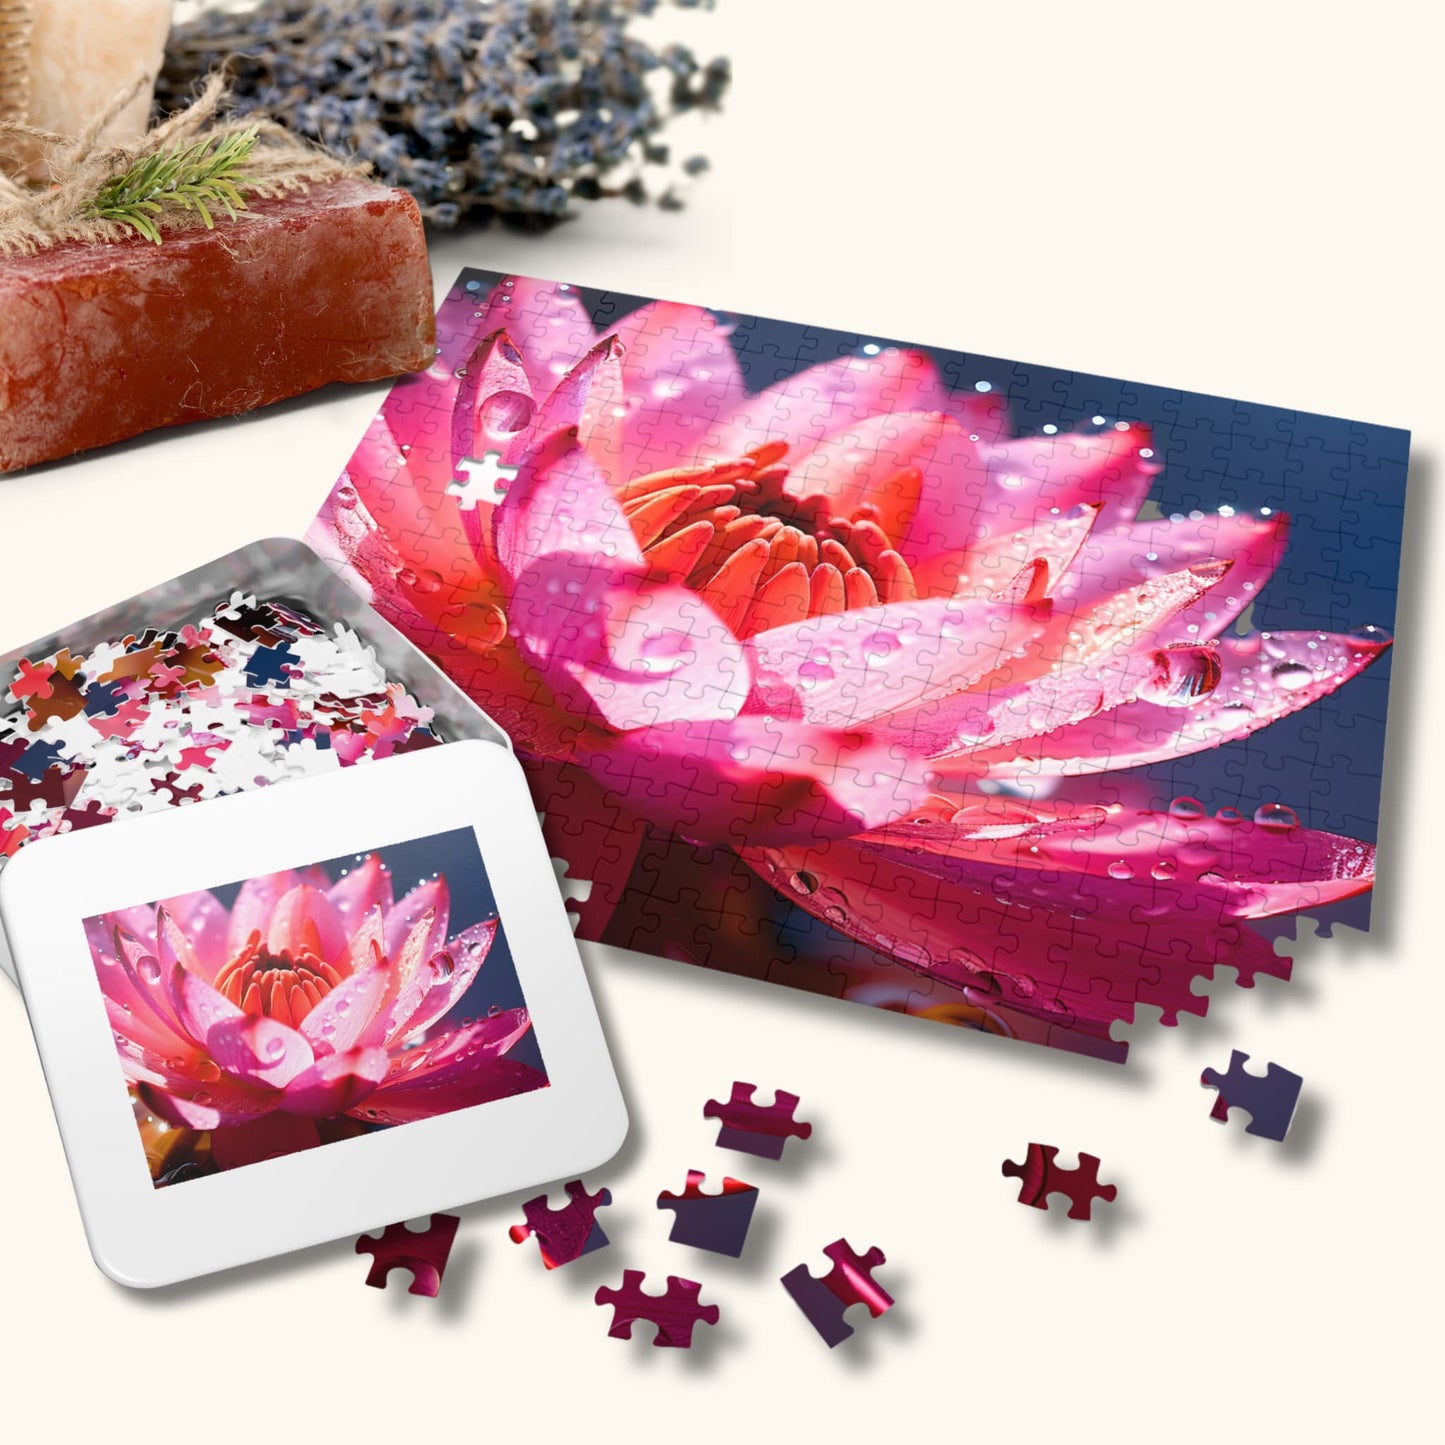 The 1000 piece jigsaw puzzle of a pink lotus flower with its sturdy, attractively designed box, showcasing the partially assembled puzzle pieces.